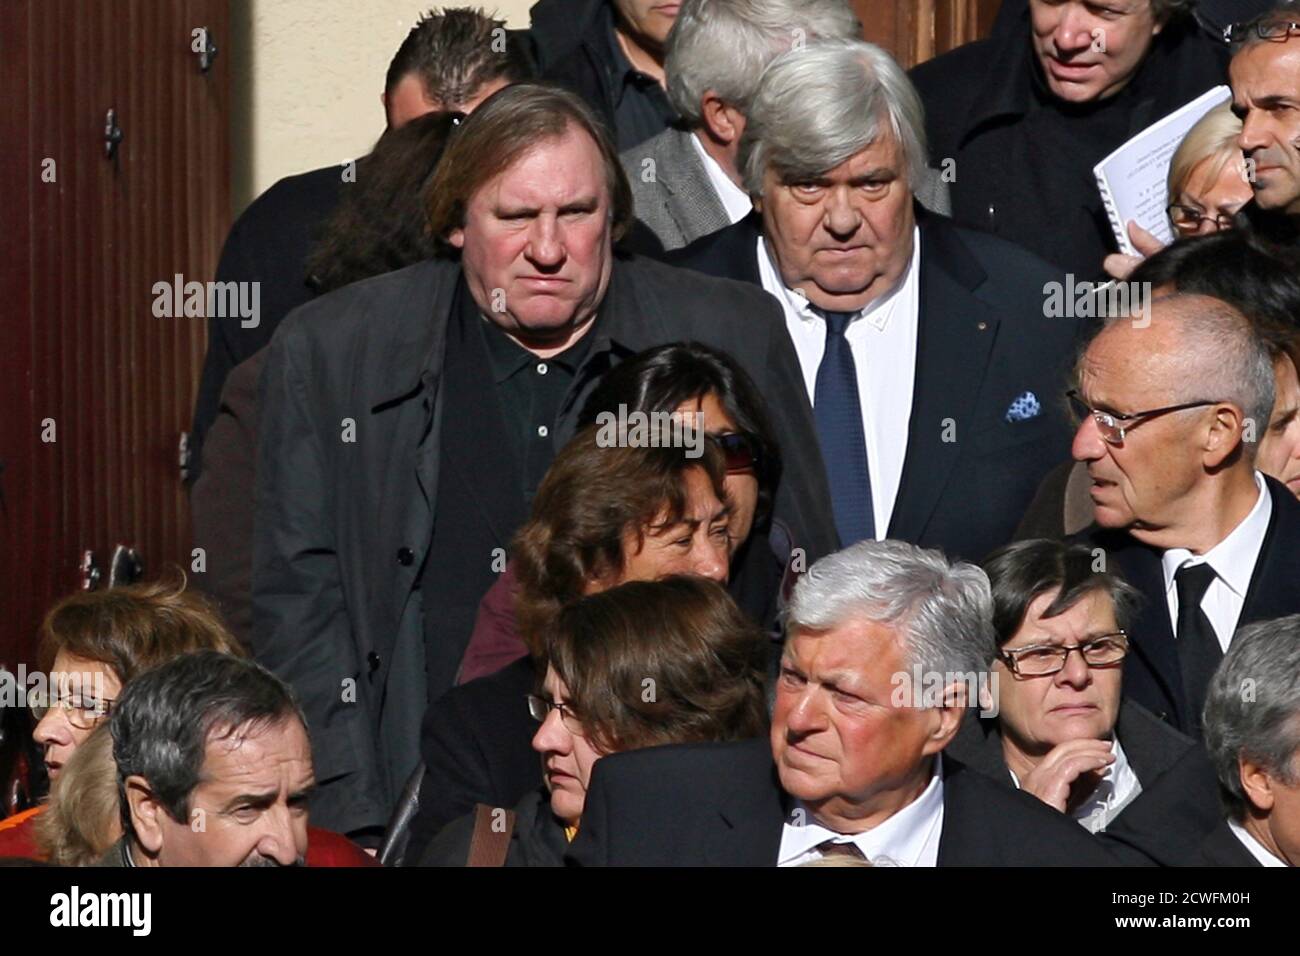 French actor Gerard Depardieu (L) and Louis Nicollin, president of the  Montpellier Football Club, leave funeral services for Georges Freche,  French politician and president of the Regional Council of  Languedoc-Roussillon, at the